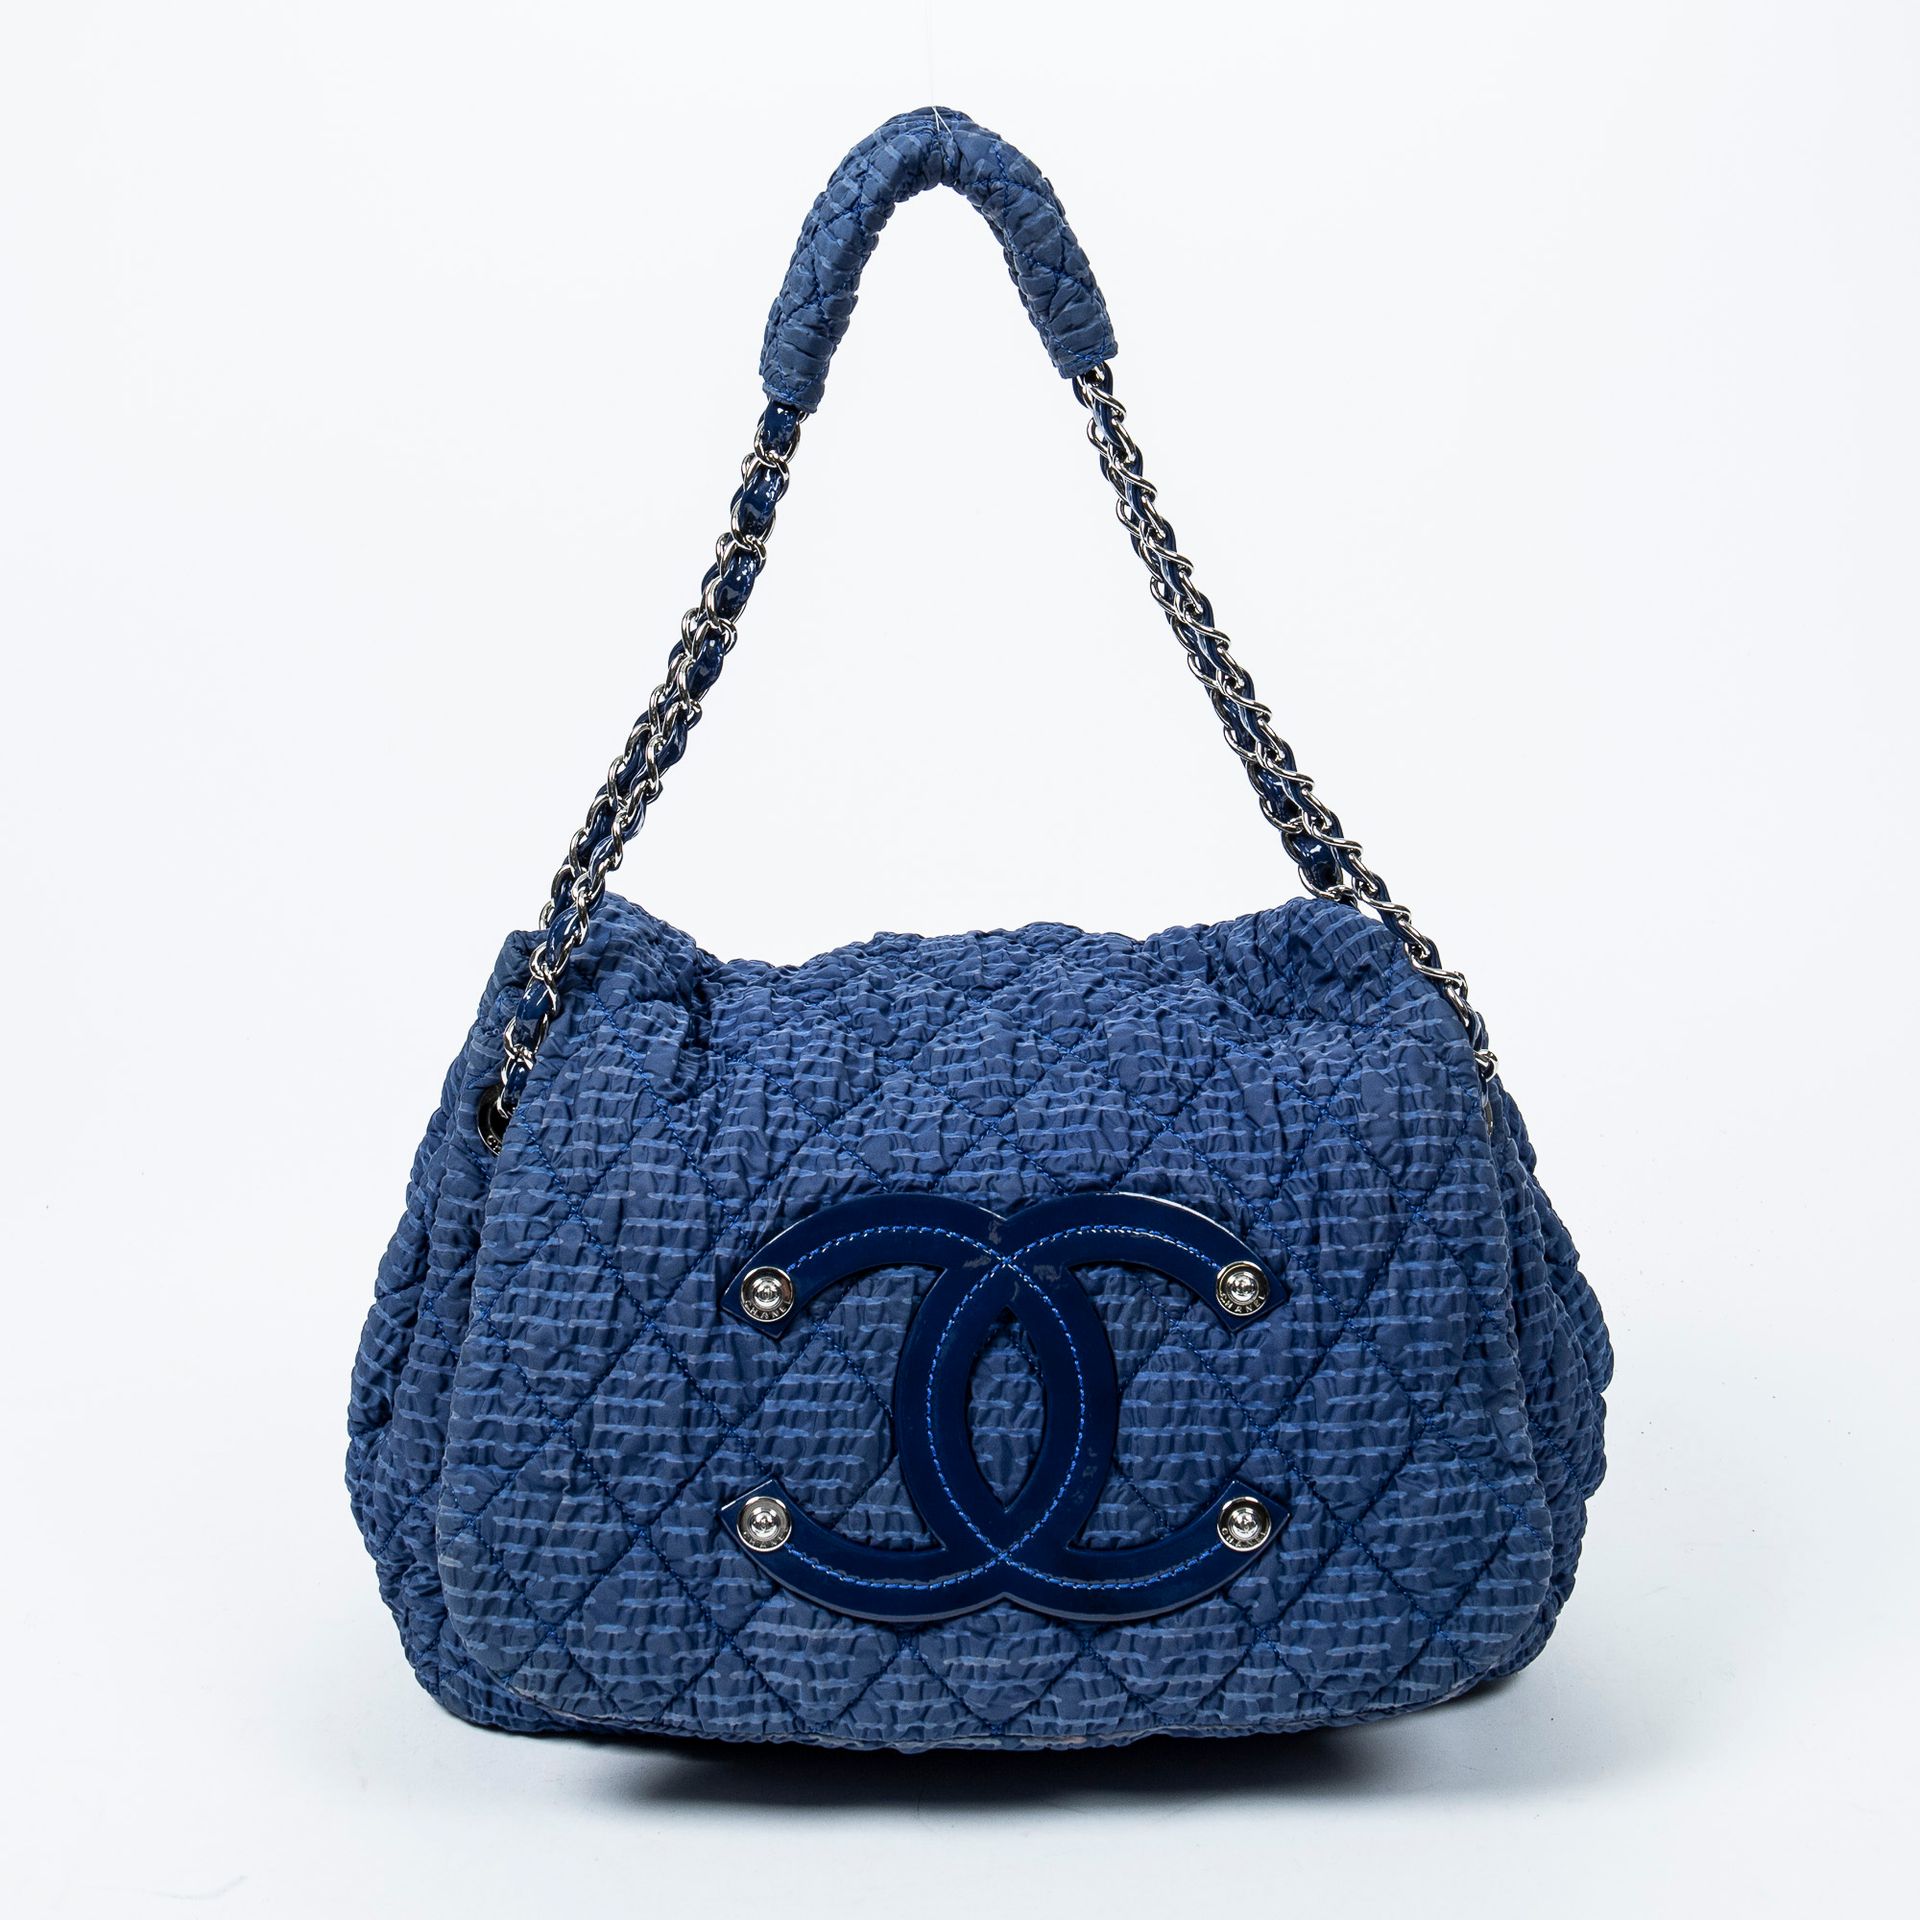 Chanel CHANEL - Handbag in nylon with blue pleated effect - Inside in grey cotto&hellip;